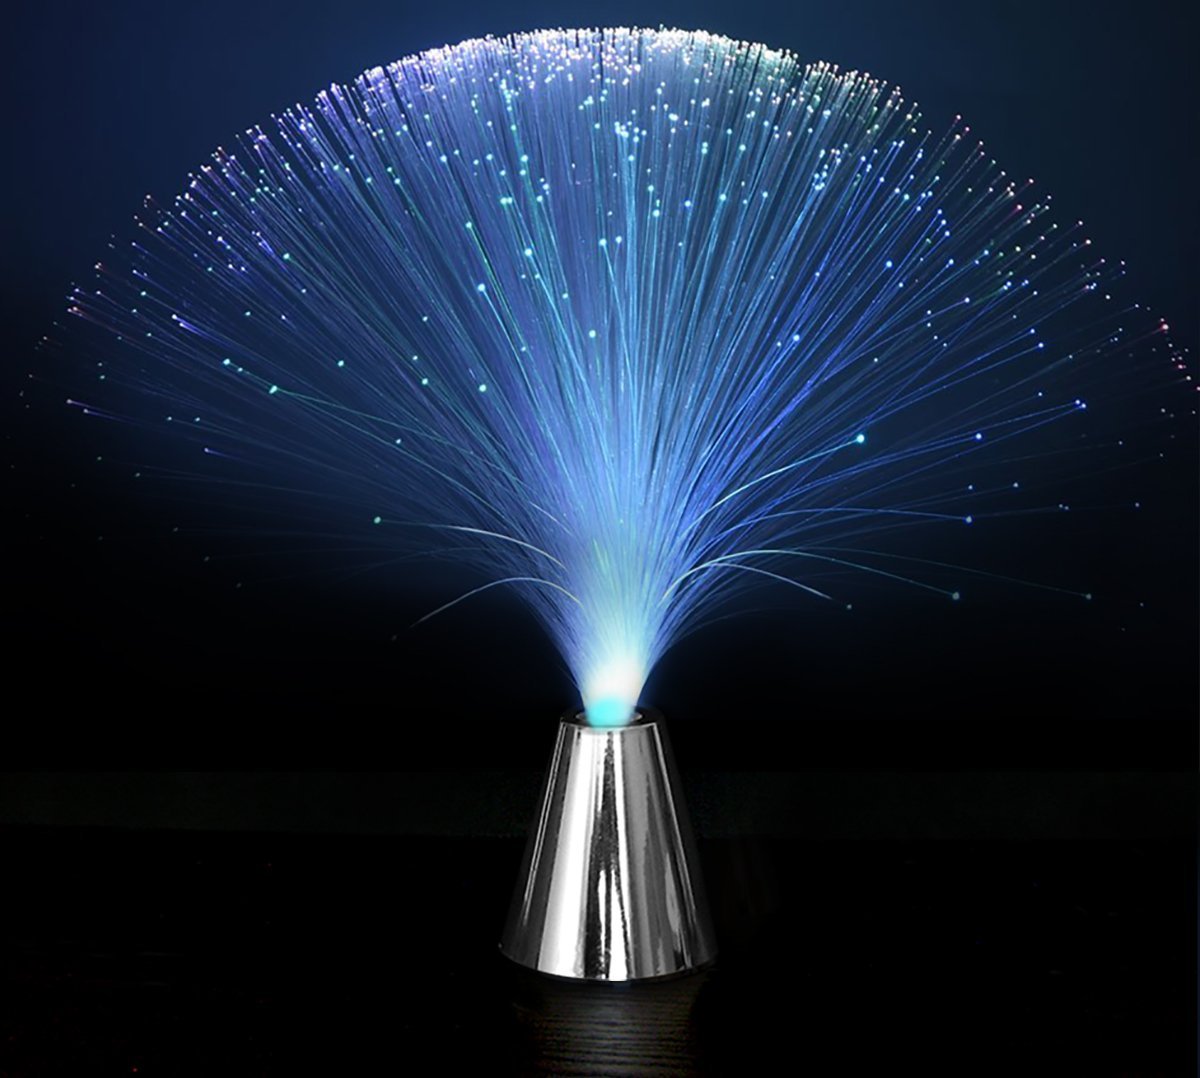 Choosing The Right Fiber Optic Lamps For Home Use - Warisan Lighting